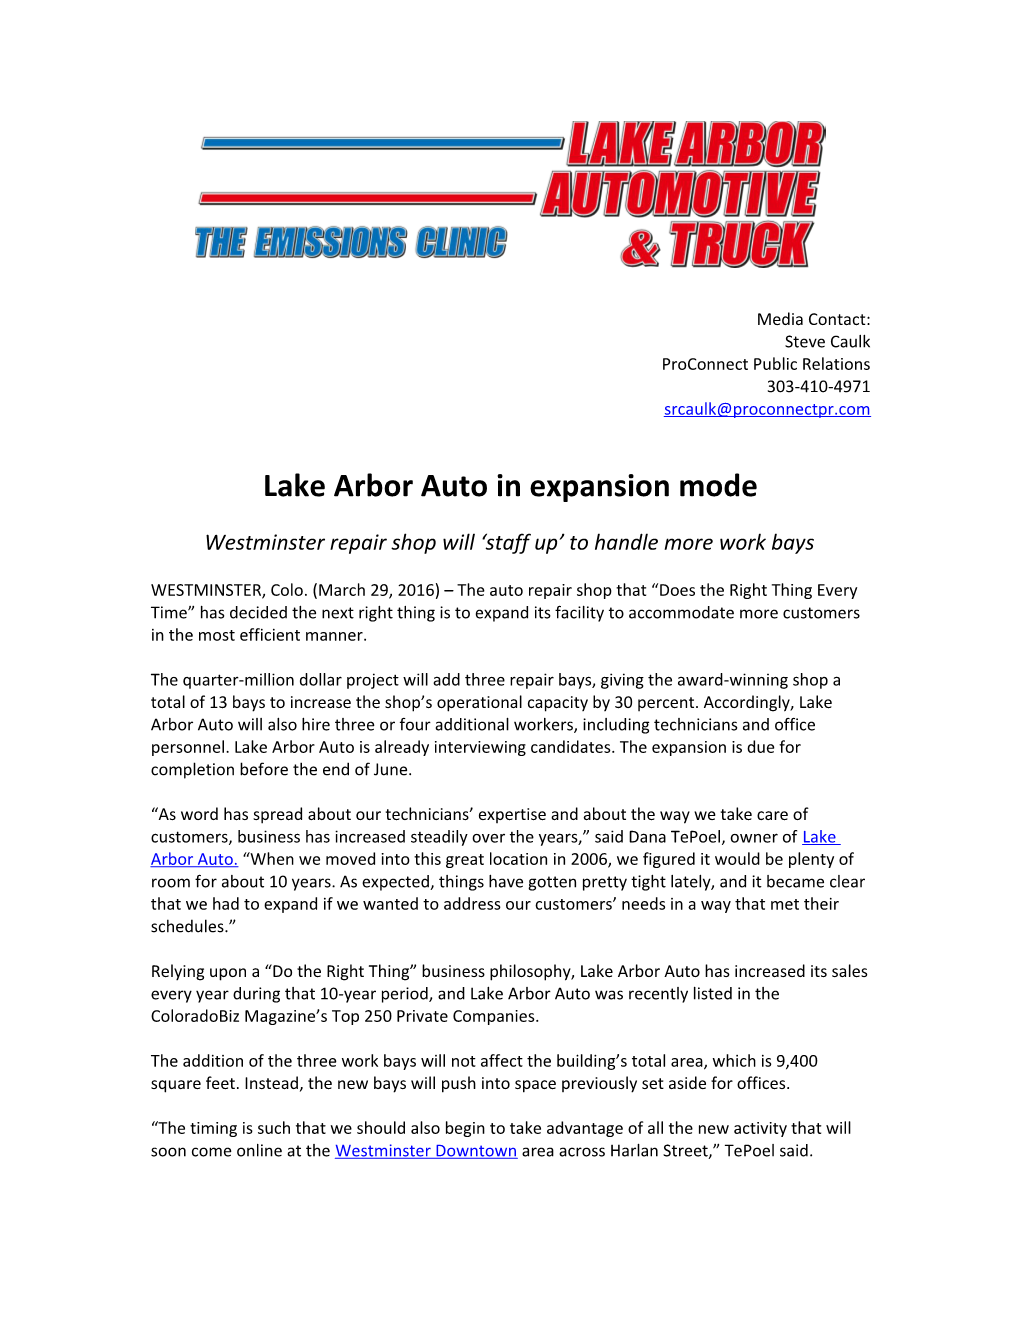 Lake Arbor Auto in Expansion Mode